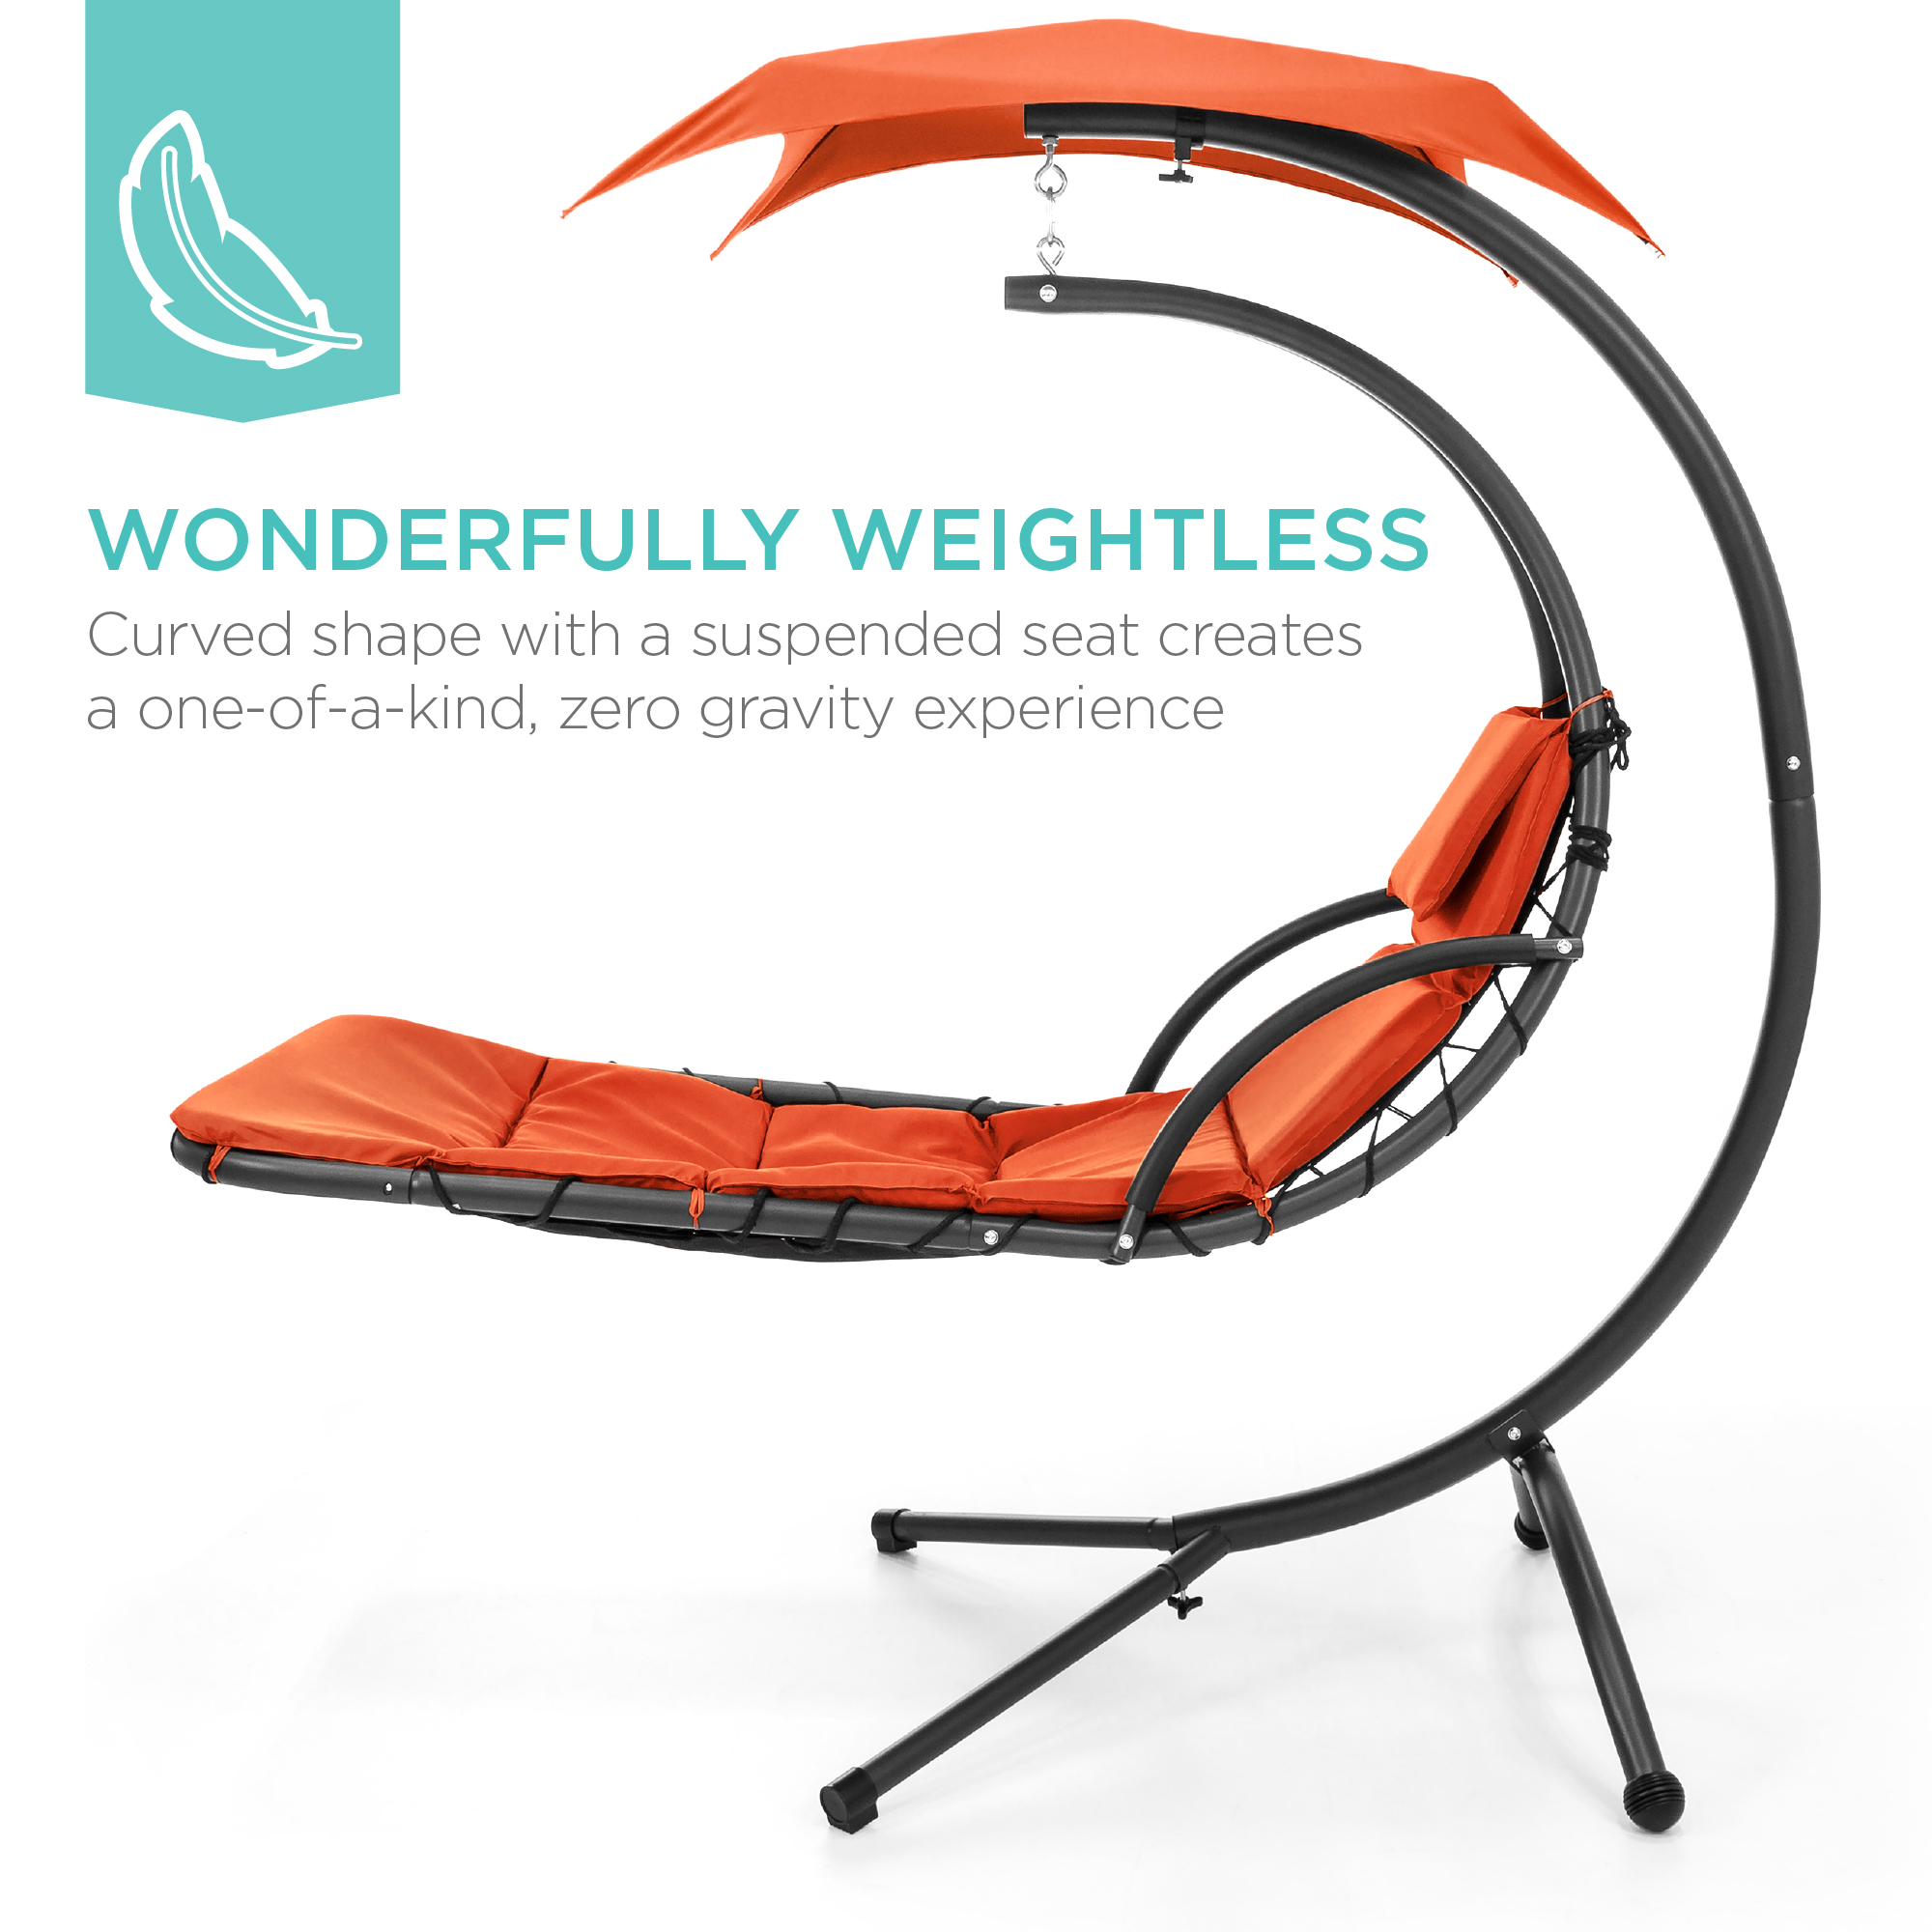 Best Choice Products Hanging Curved Chaise Lounge Chair Swing for Backyard, Patio w/ Pillow, Shade, Stand - Orange - image 3 of 8